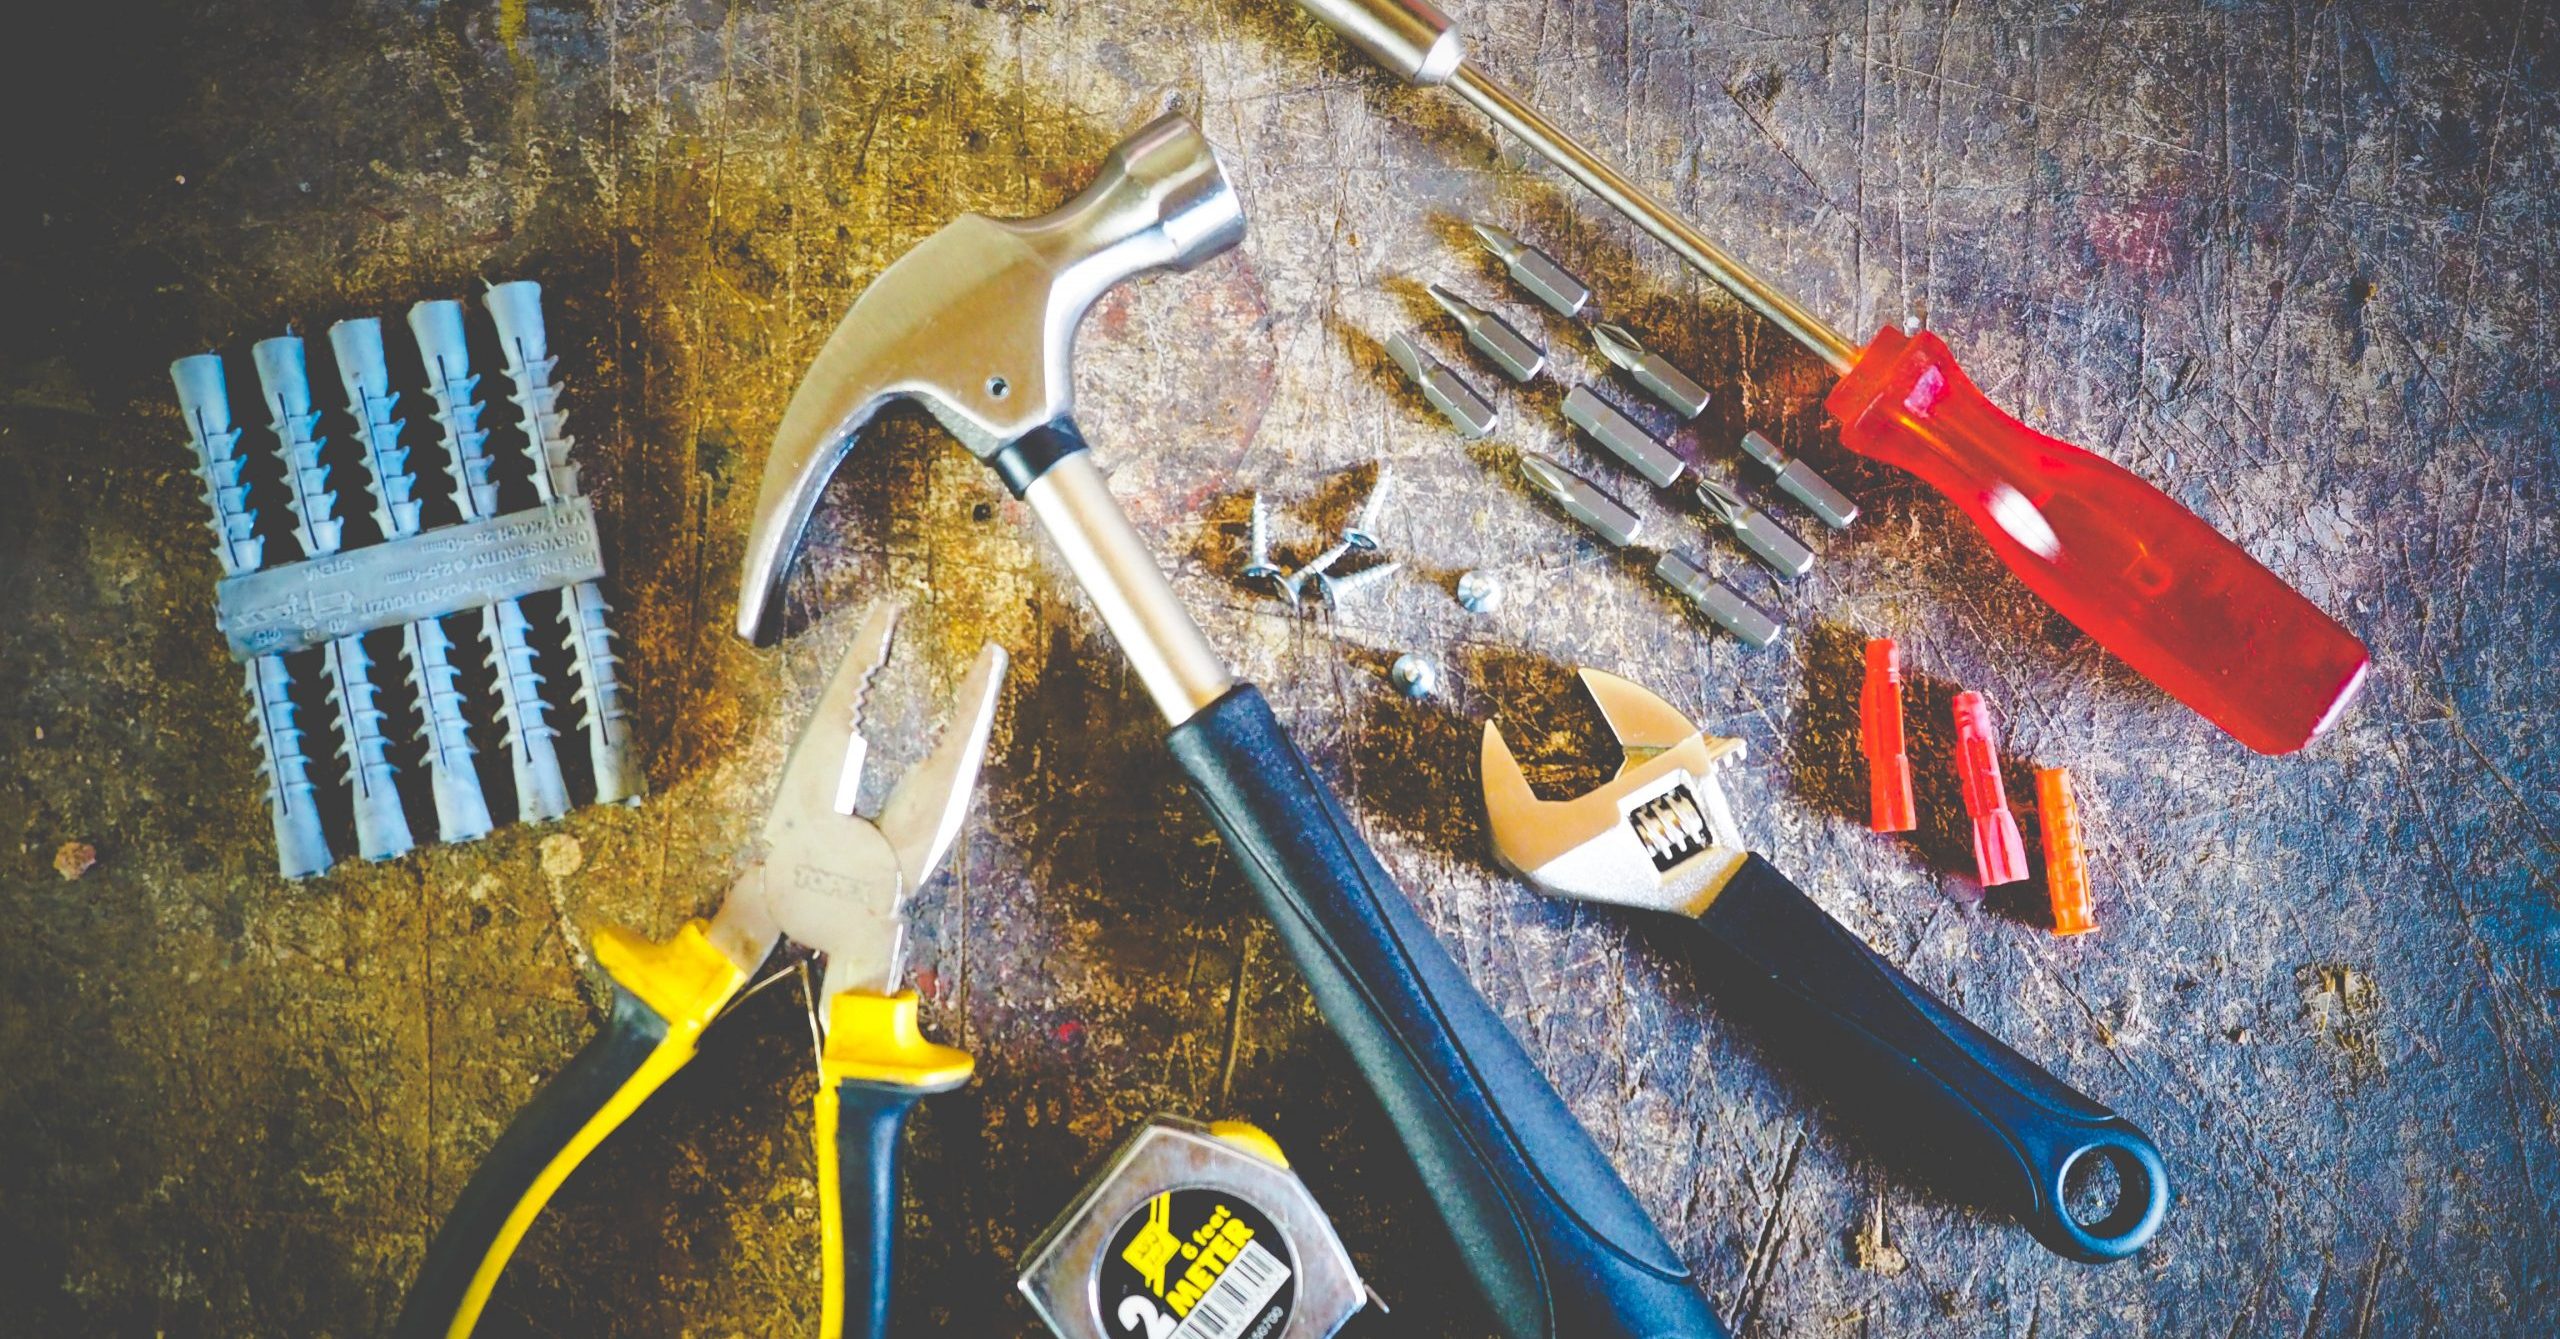 Inc. Magazine: 7 Tools for Your SMB in 2016